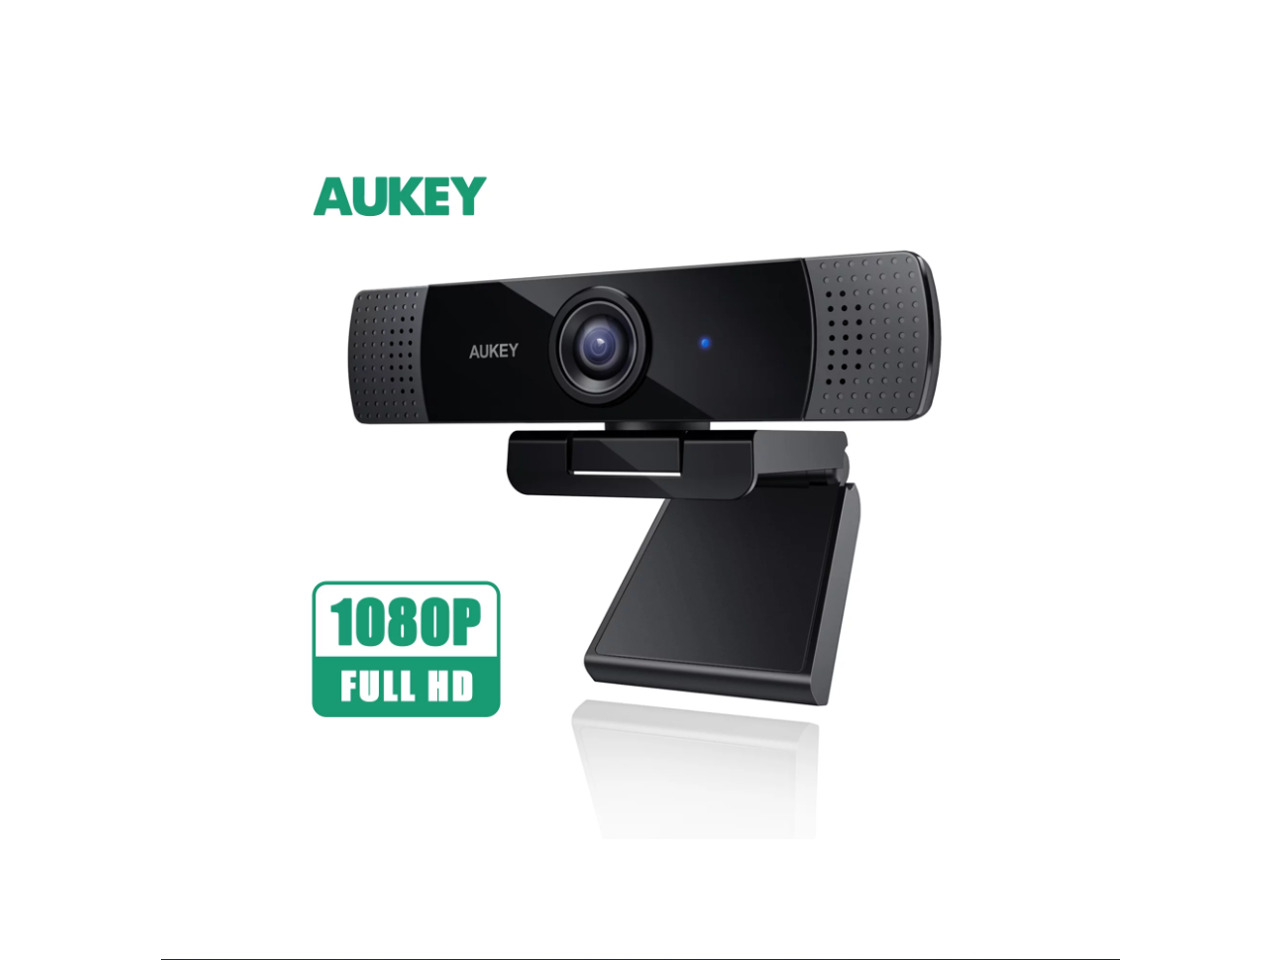 AUKEY 1080P Webcam w/ Dual Noise Reduction Stereo Microphones 